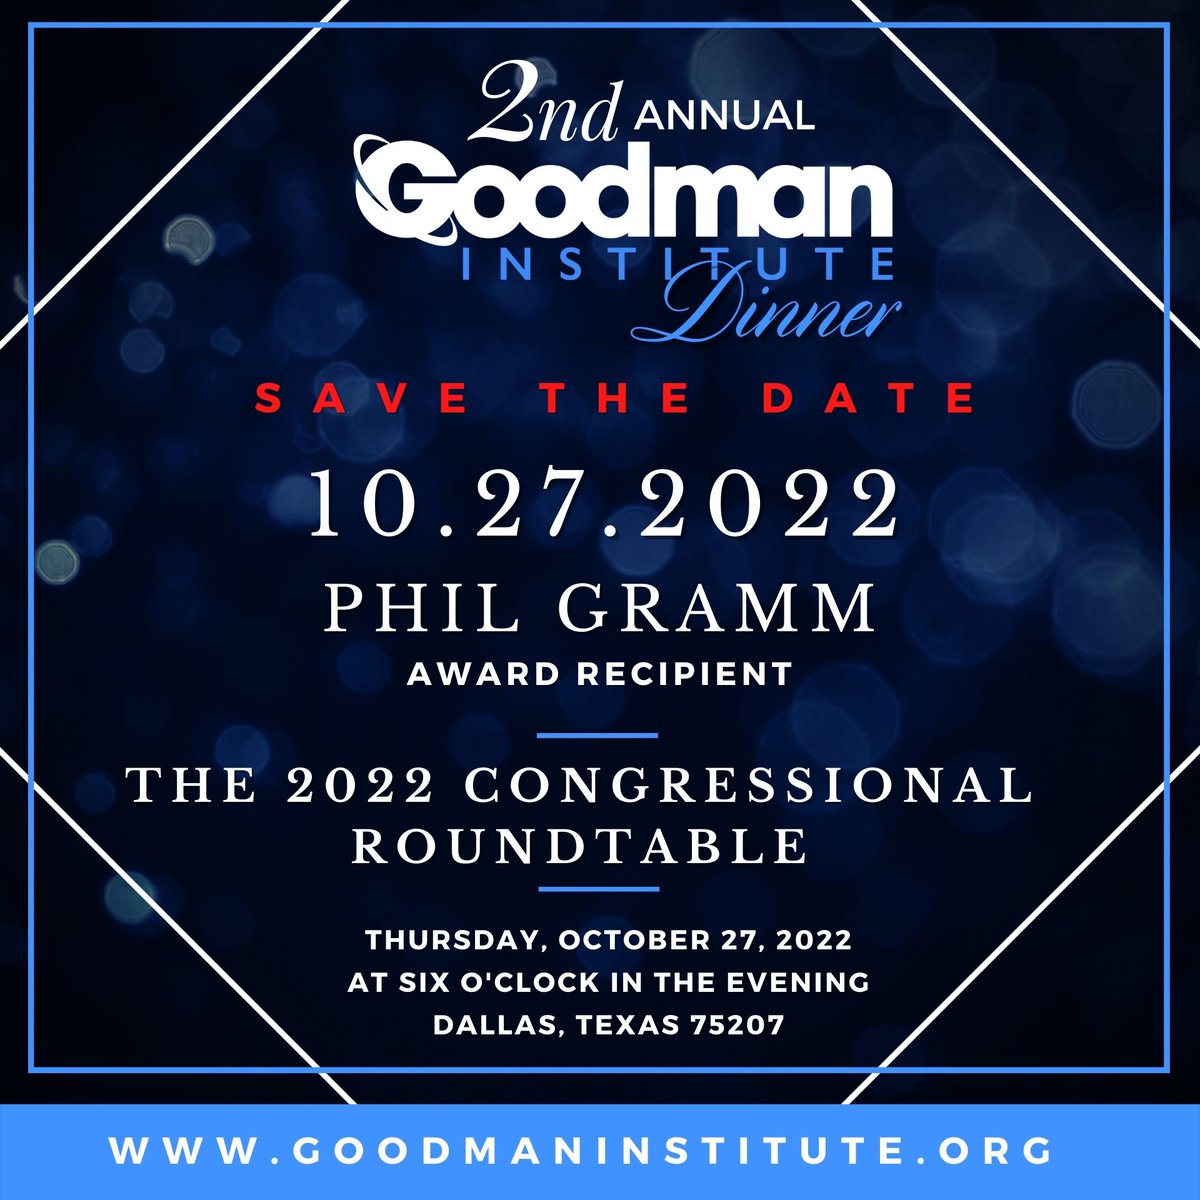 Save the date for our 2nd Annual Goodman Institute Dinner. Thursday, October 27, 2022. Sponsorship and tickets are available for purchase. #goodmaninstitute #dallasevent #philgramm bit.ly/3yMi9b7